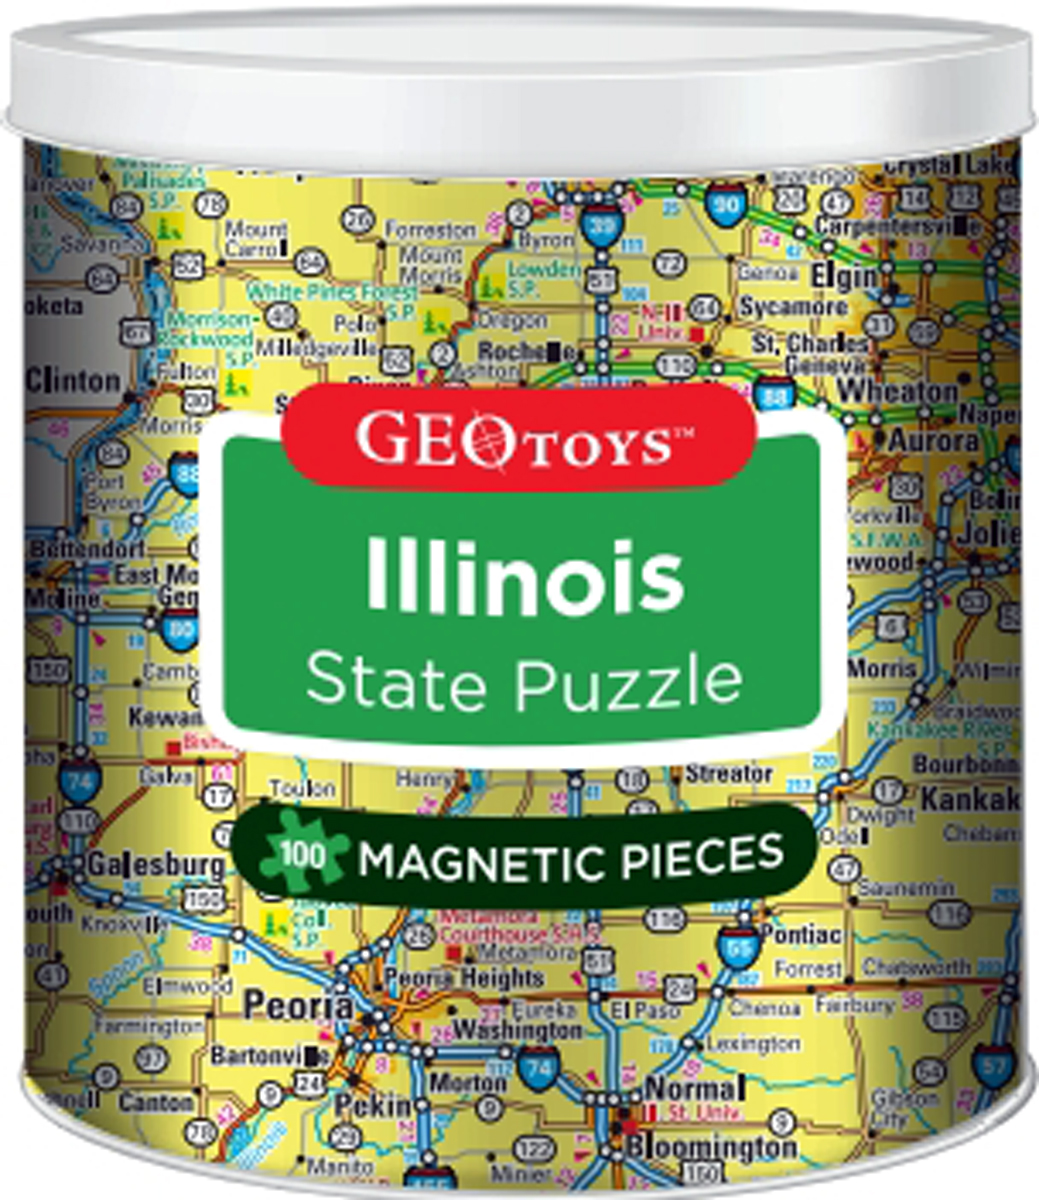 Magnetic Puzzle - Illinois Maps / Geography Jigsaw Puzzle